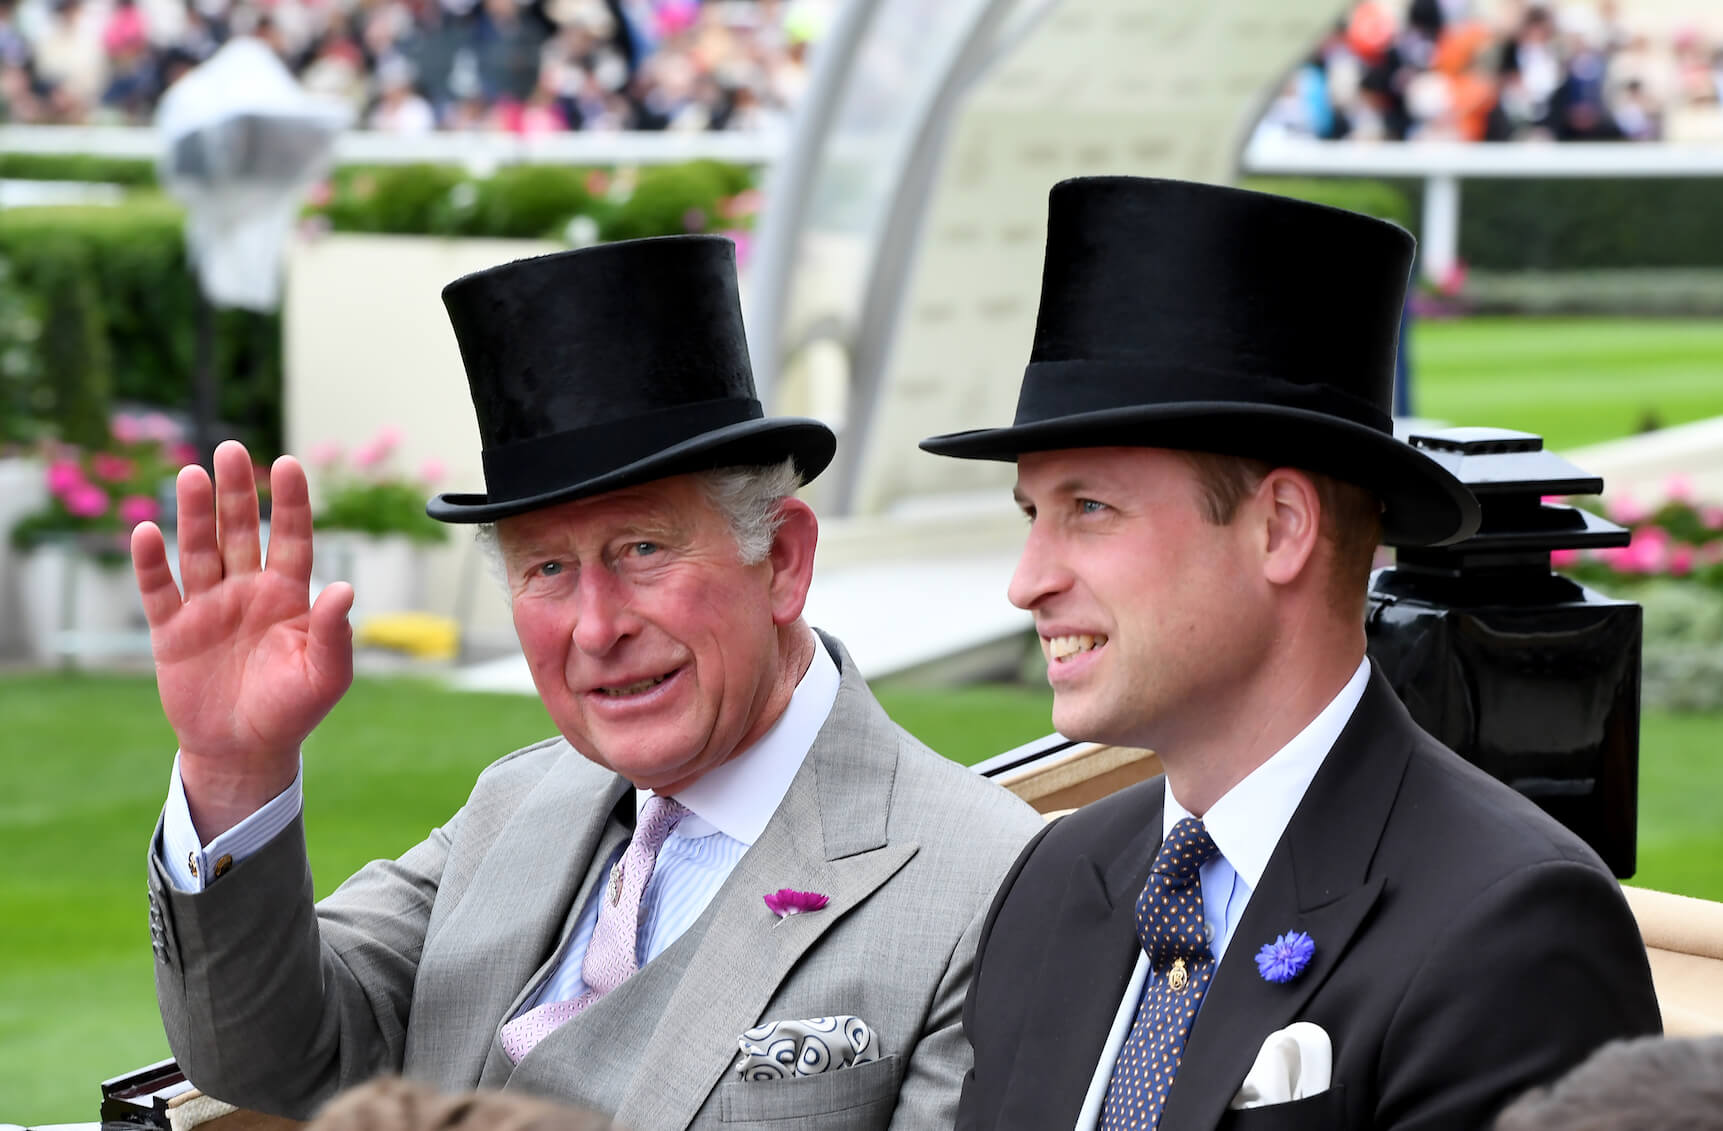 King Charles and Prince William wearing top hats and sitting next to each other